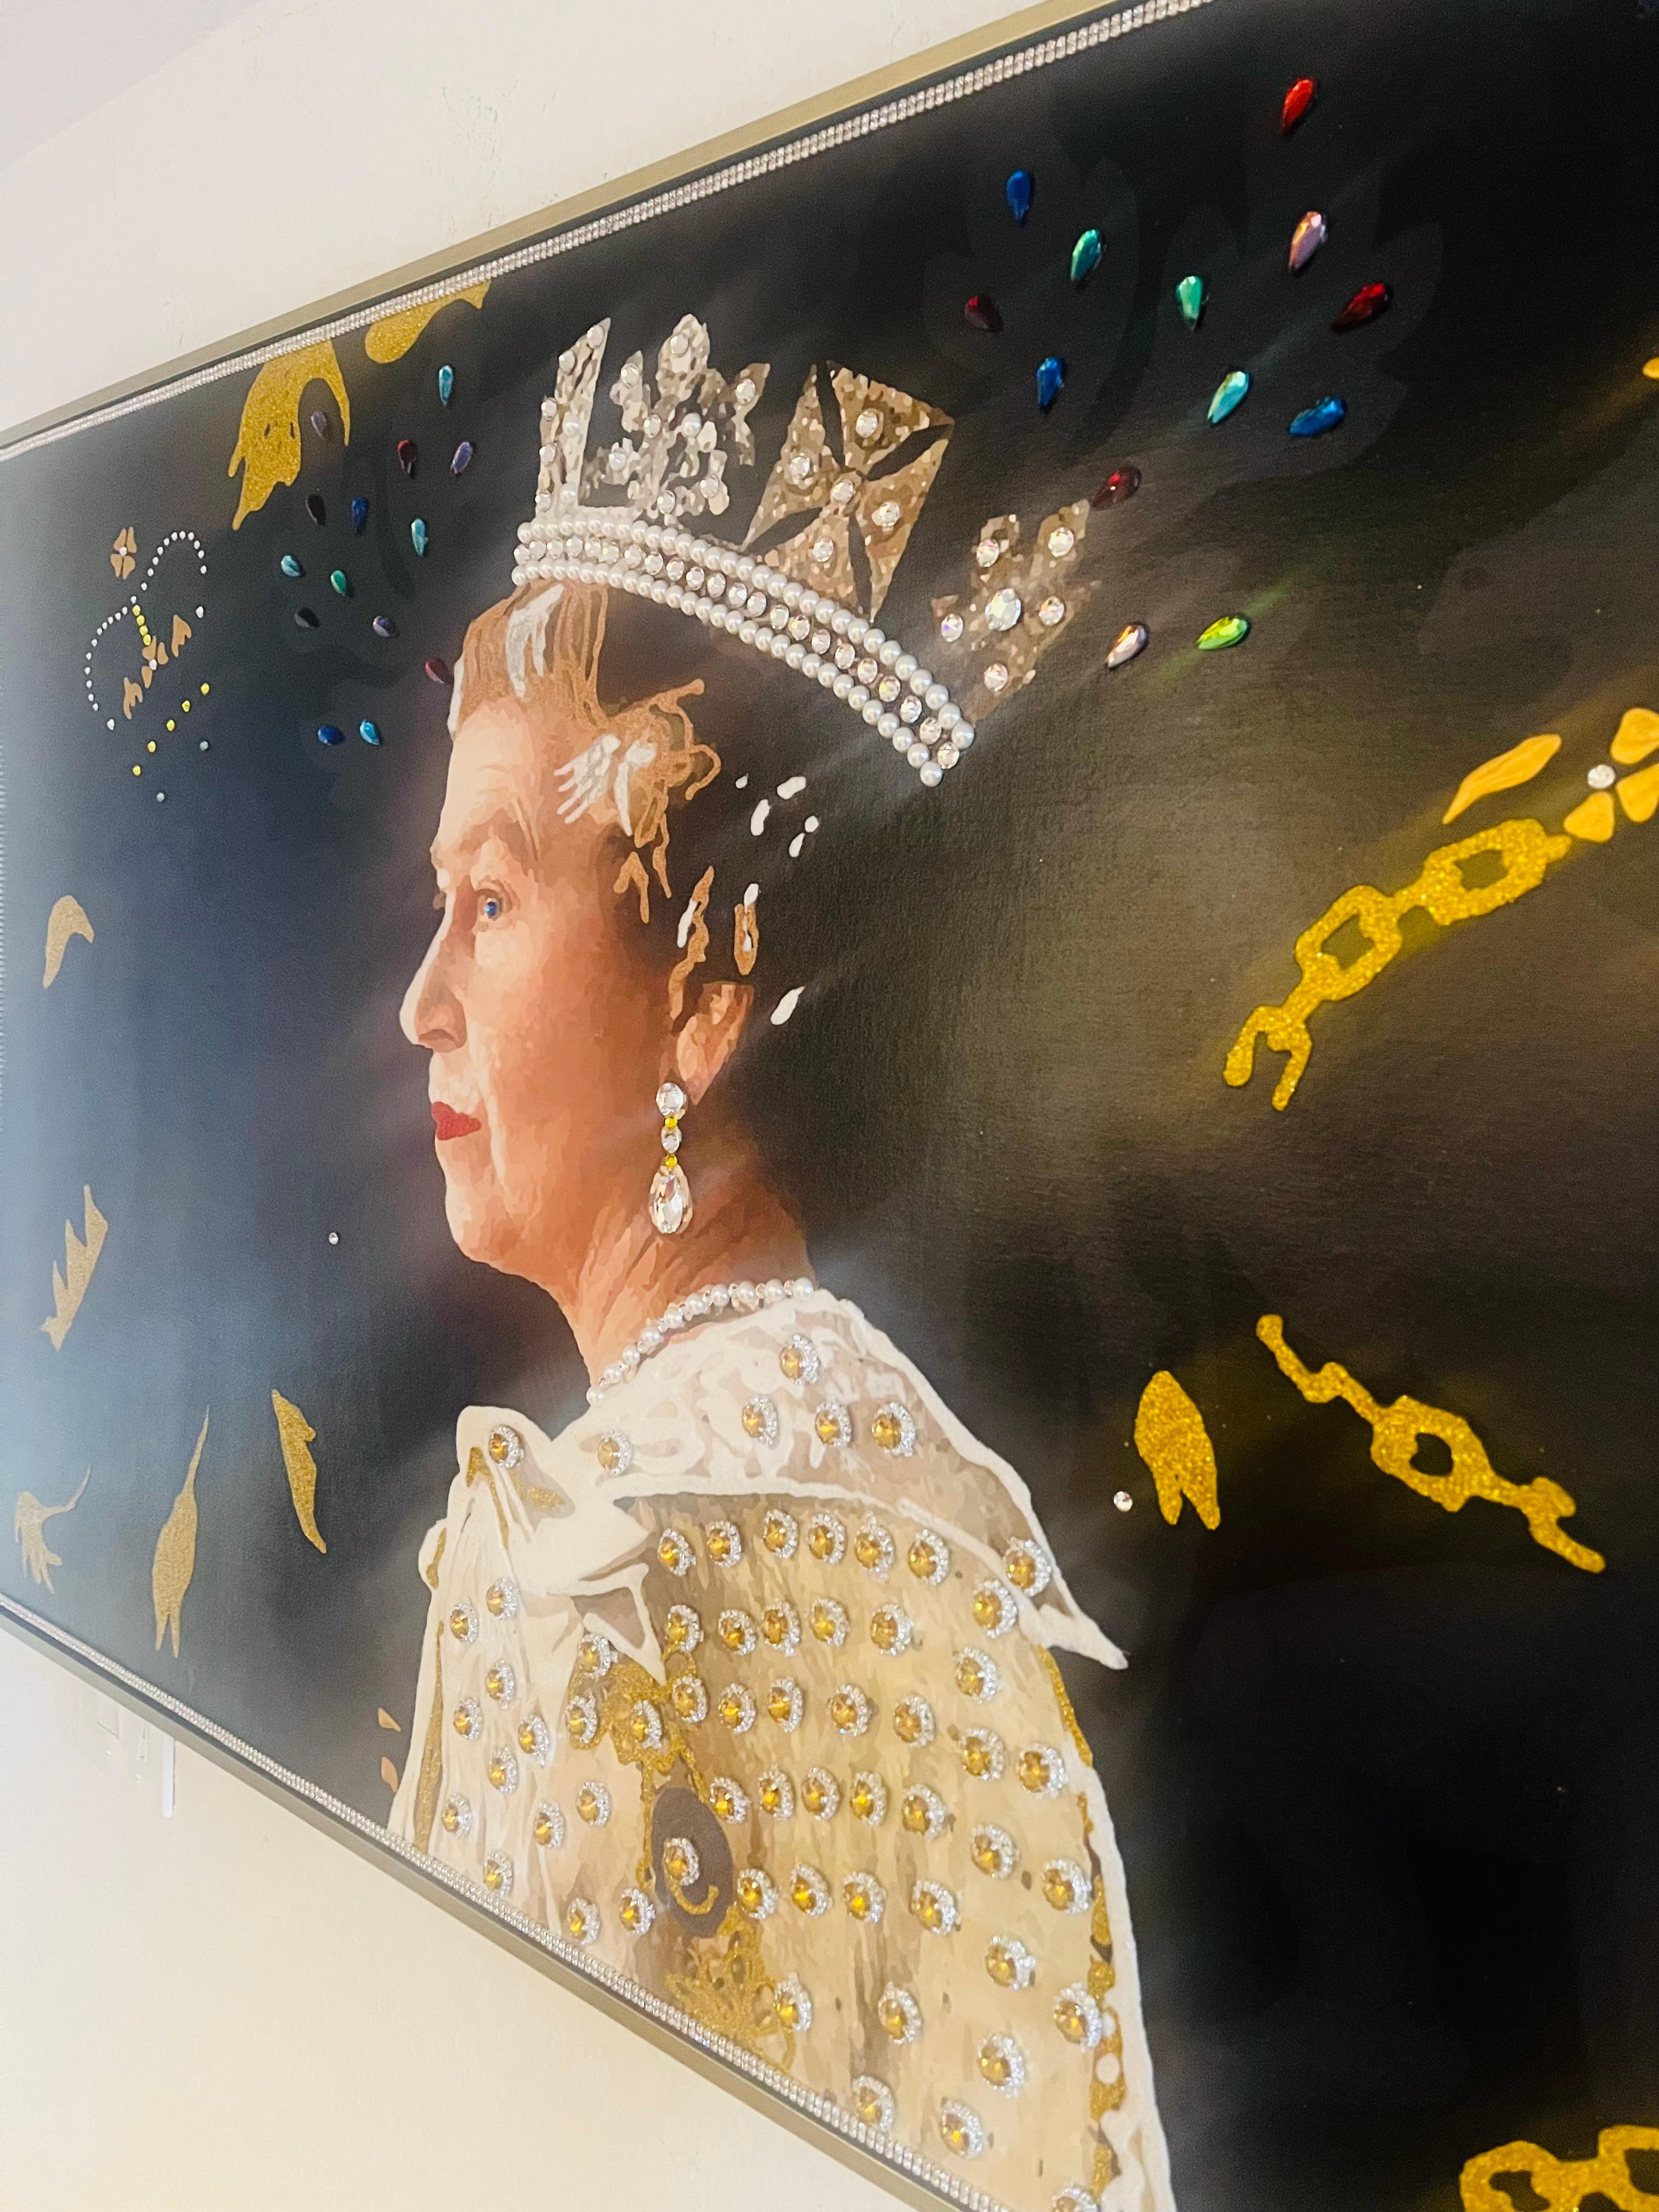                  **ANNUAL SUPER SALE TIL JUNE 15th ONLY**
*This Price Won't Be Repeated Again This Year - Take Advantage Of It*

Her Majestic Queen Elizabeth is the THIRD and final homage of the artist to the greatest and most relevant queen of